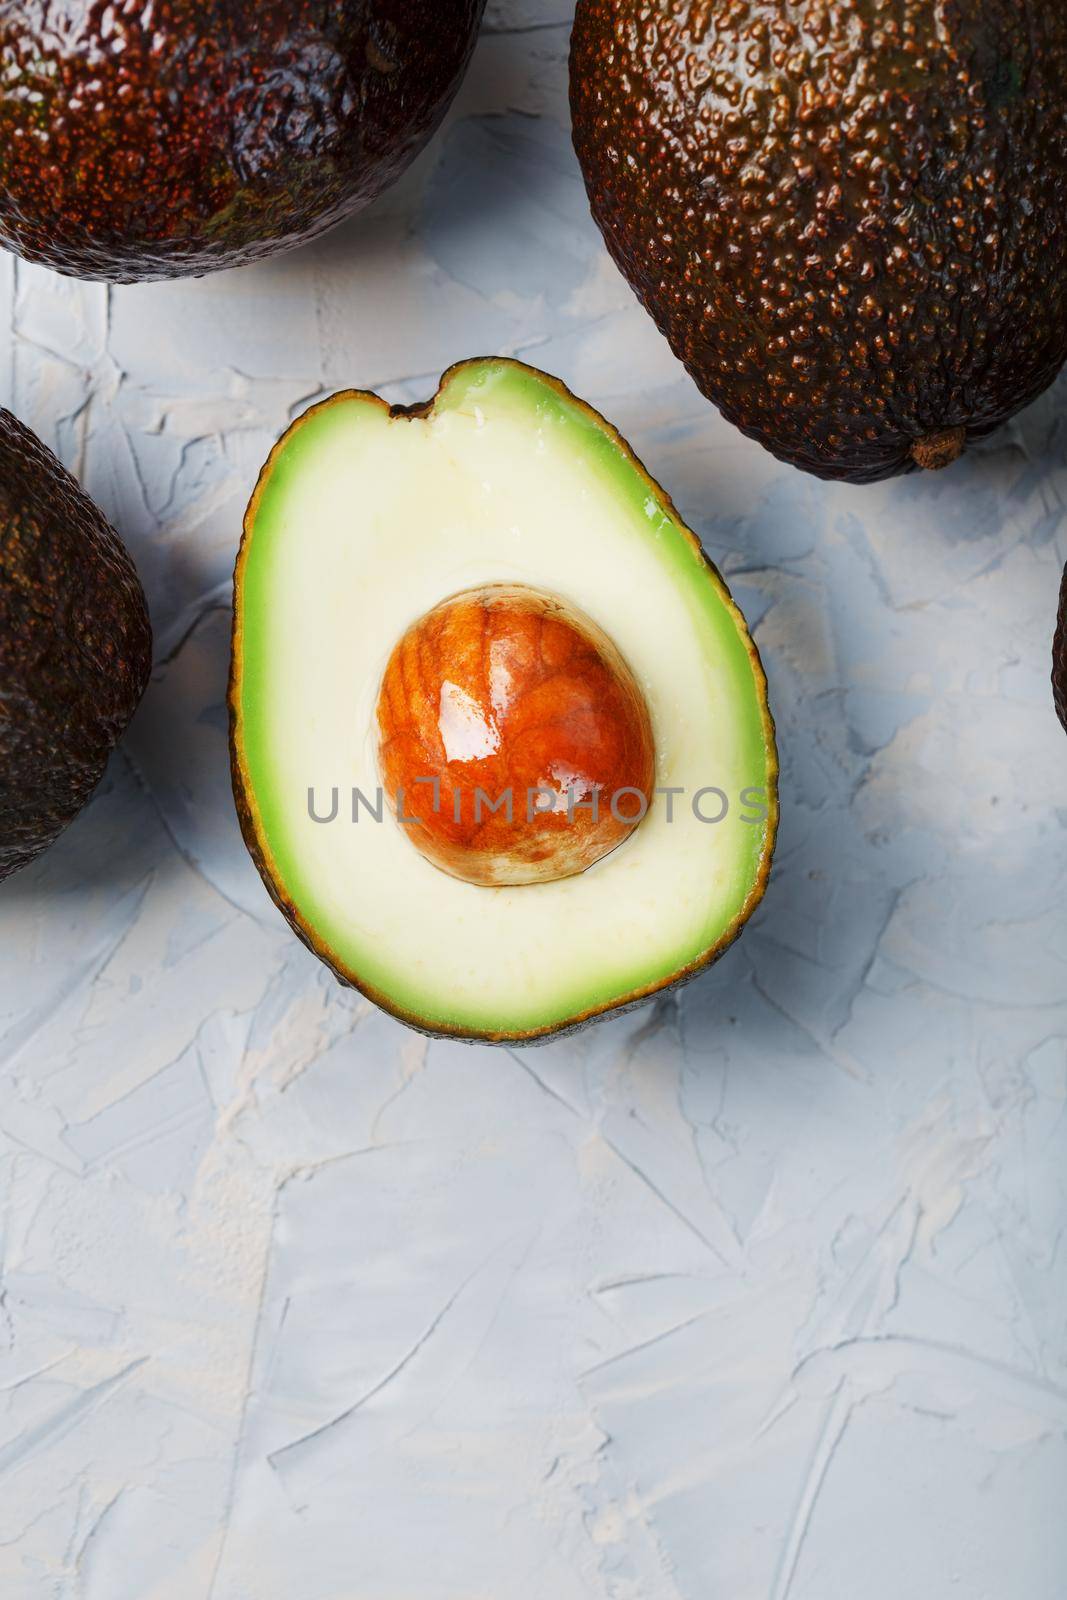 Avocado halves with whole Hass fruits on a background of gray concrete, stone or slate. Top view with copy space.